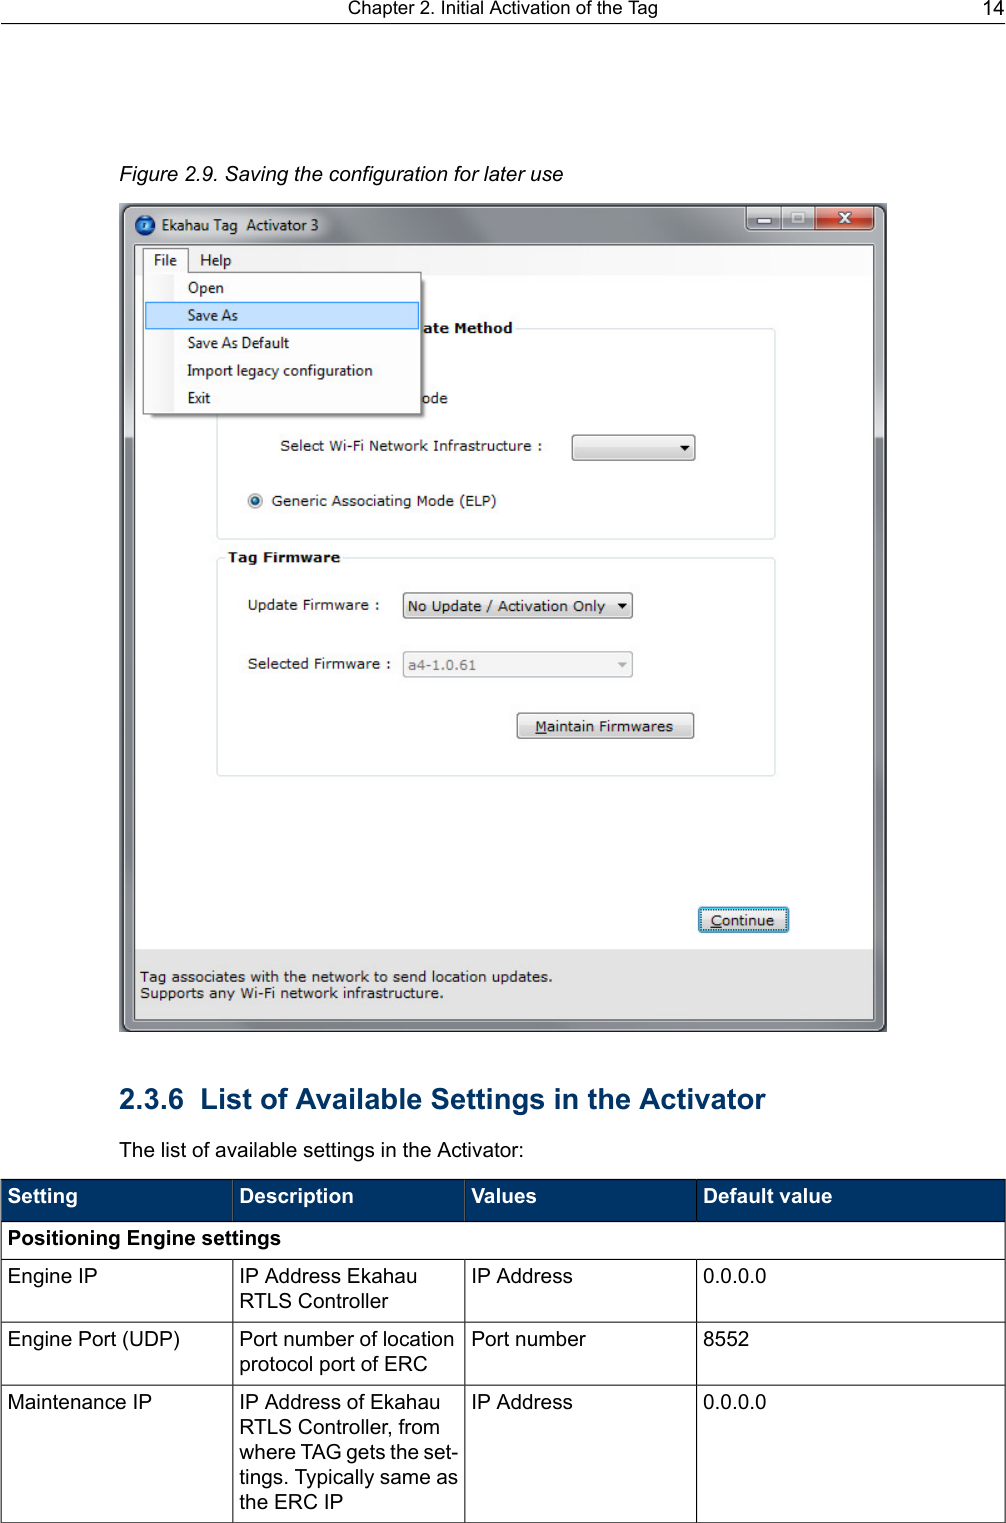 Figure 2.9. Saving the configuration for later use2.3.6 List of Available Settings in the ActivatorThe list of available settings in the Activator:Default valueValuesDescriptionSettingPositioning Engine settings0.0.0.0IP AddressIP Address EkahauRTLS ControllerEngine IP8552Port numberPort number of locationprotocol port of ERCEngine Port (UDP)0.0.0.0IP AddressIP Address of EkahauRTLS Controller, fromwhere TAG gets the set-tings. Typically same asthe ERC IPMaintenance IP14Chapter 2. Initial Activation of the Tag